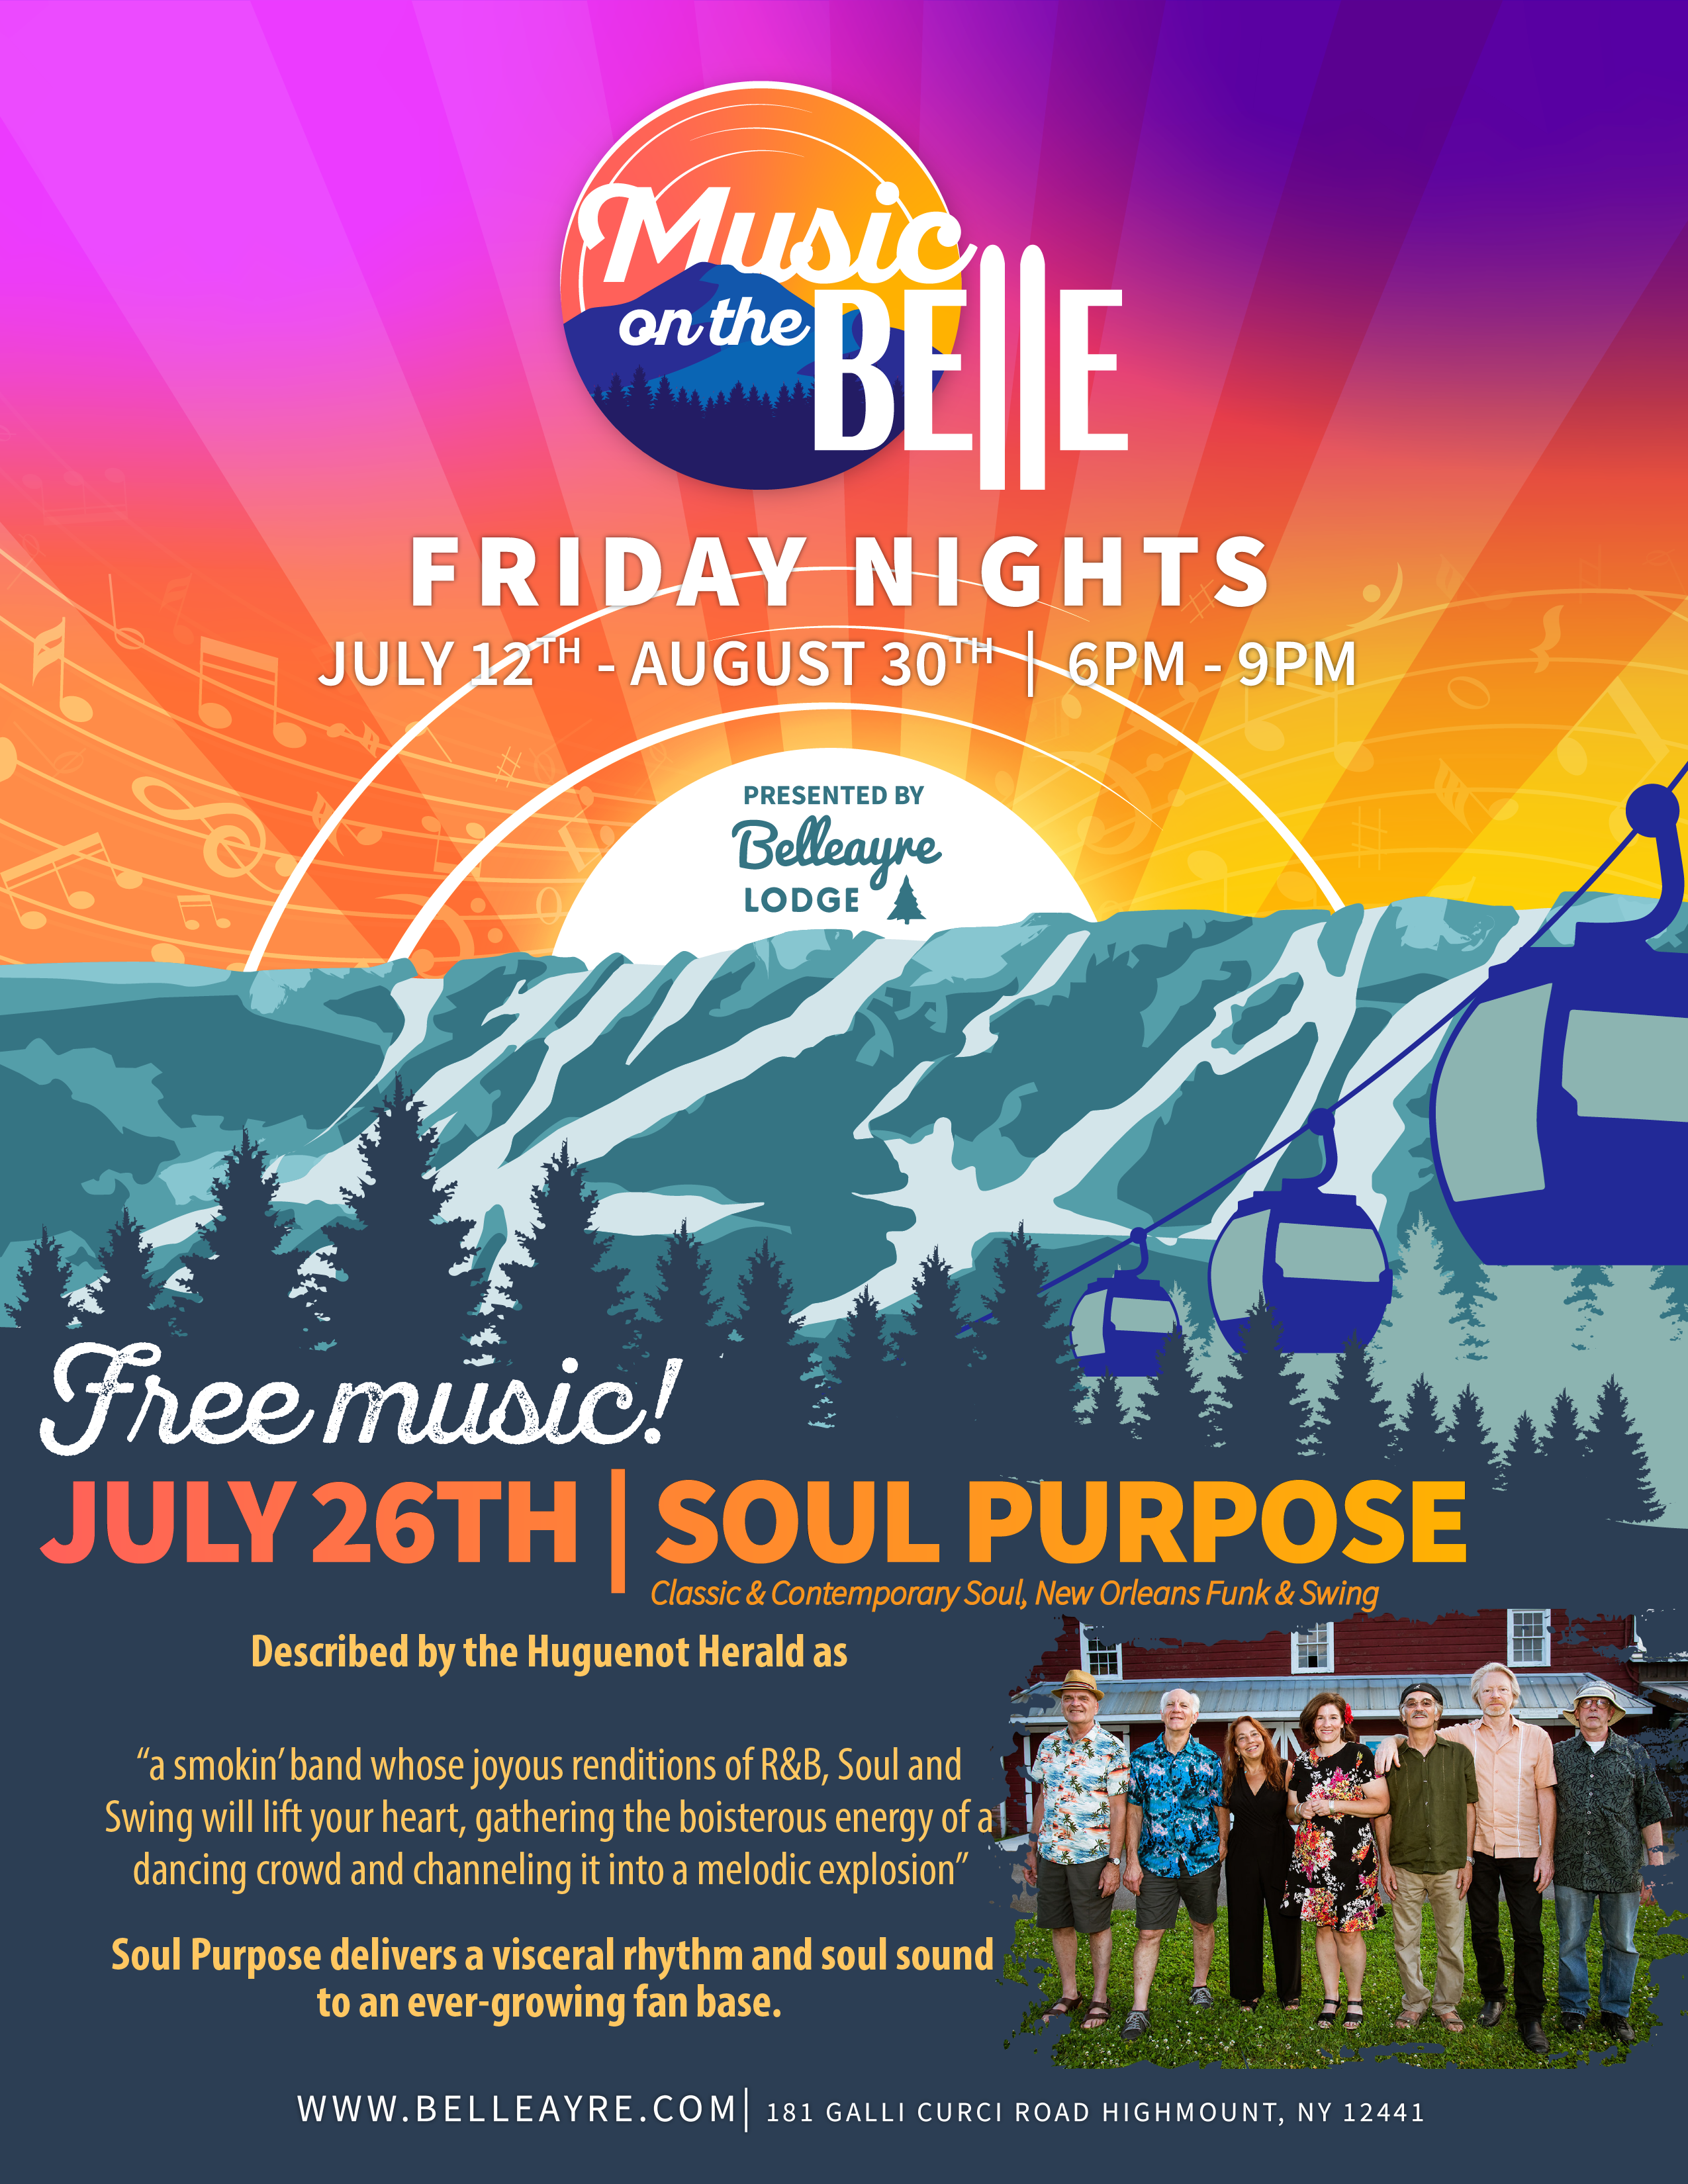 Soul Purpose Music on the Belle Friday nights flyer July 26th